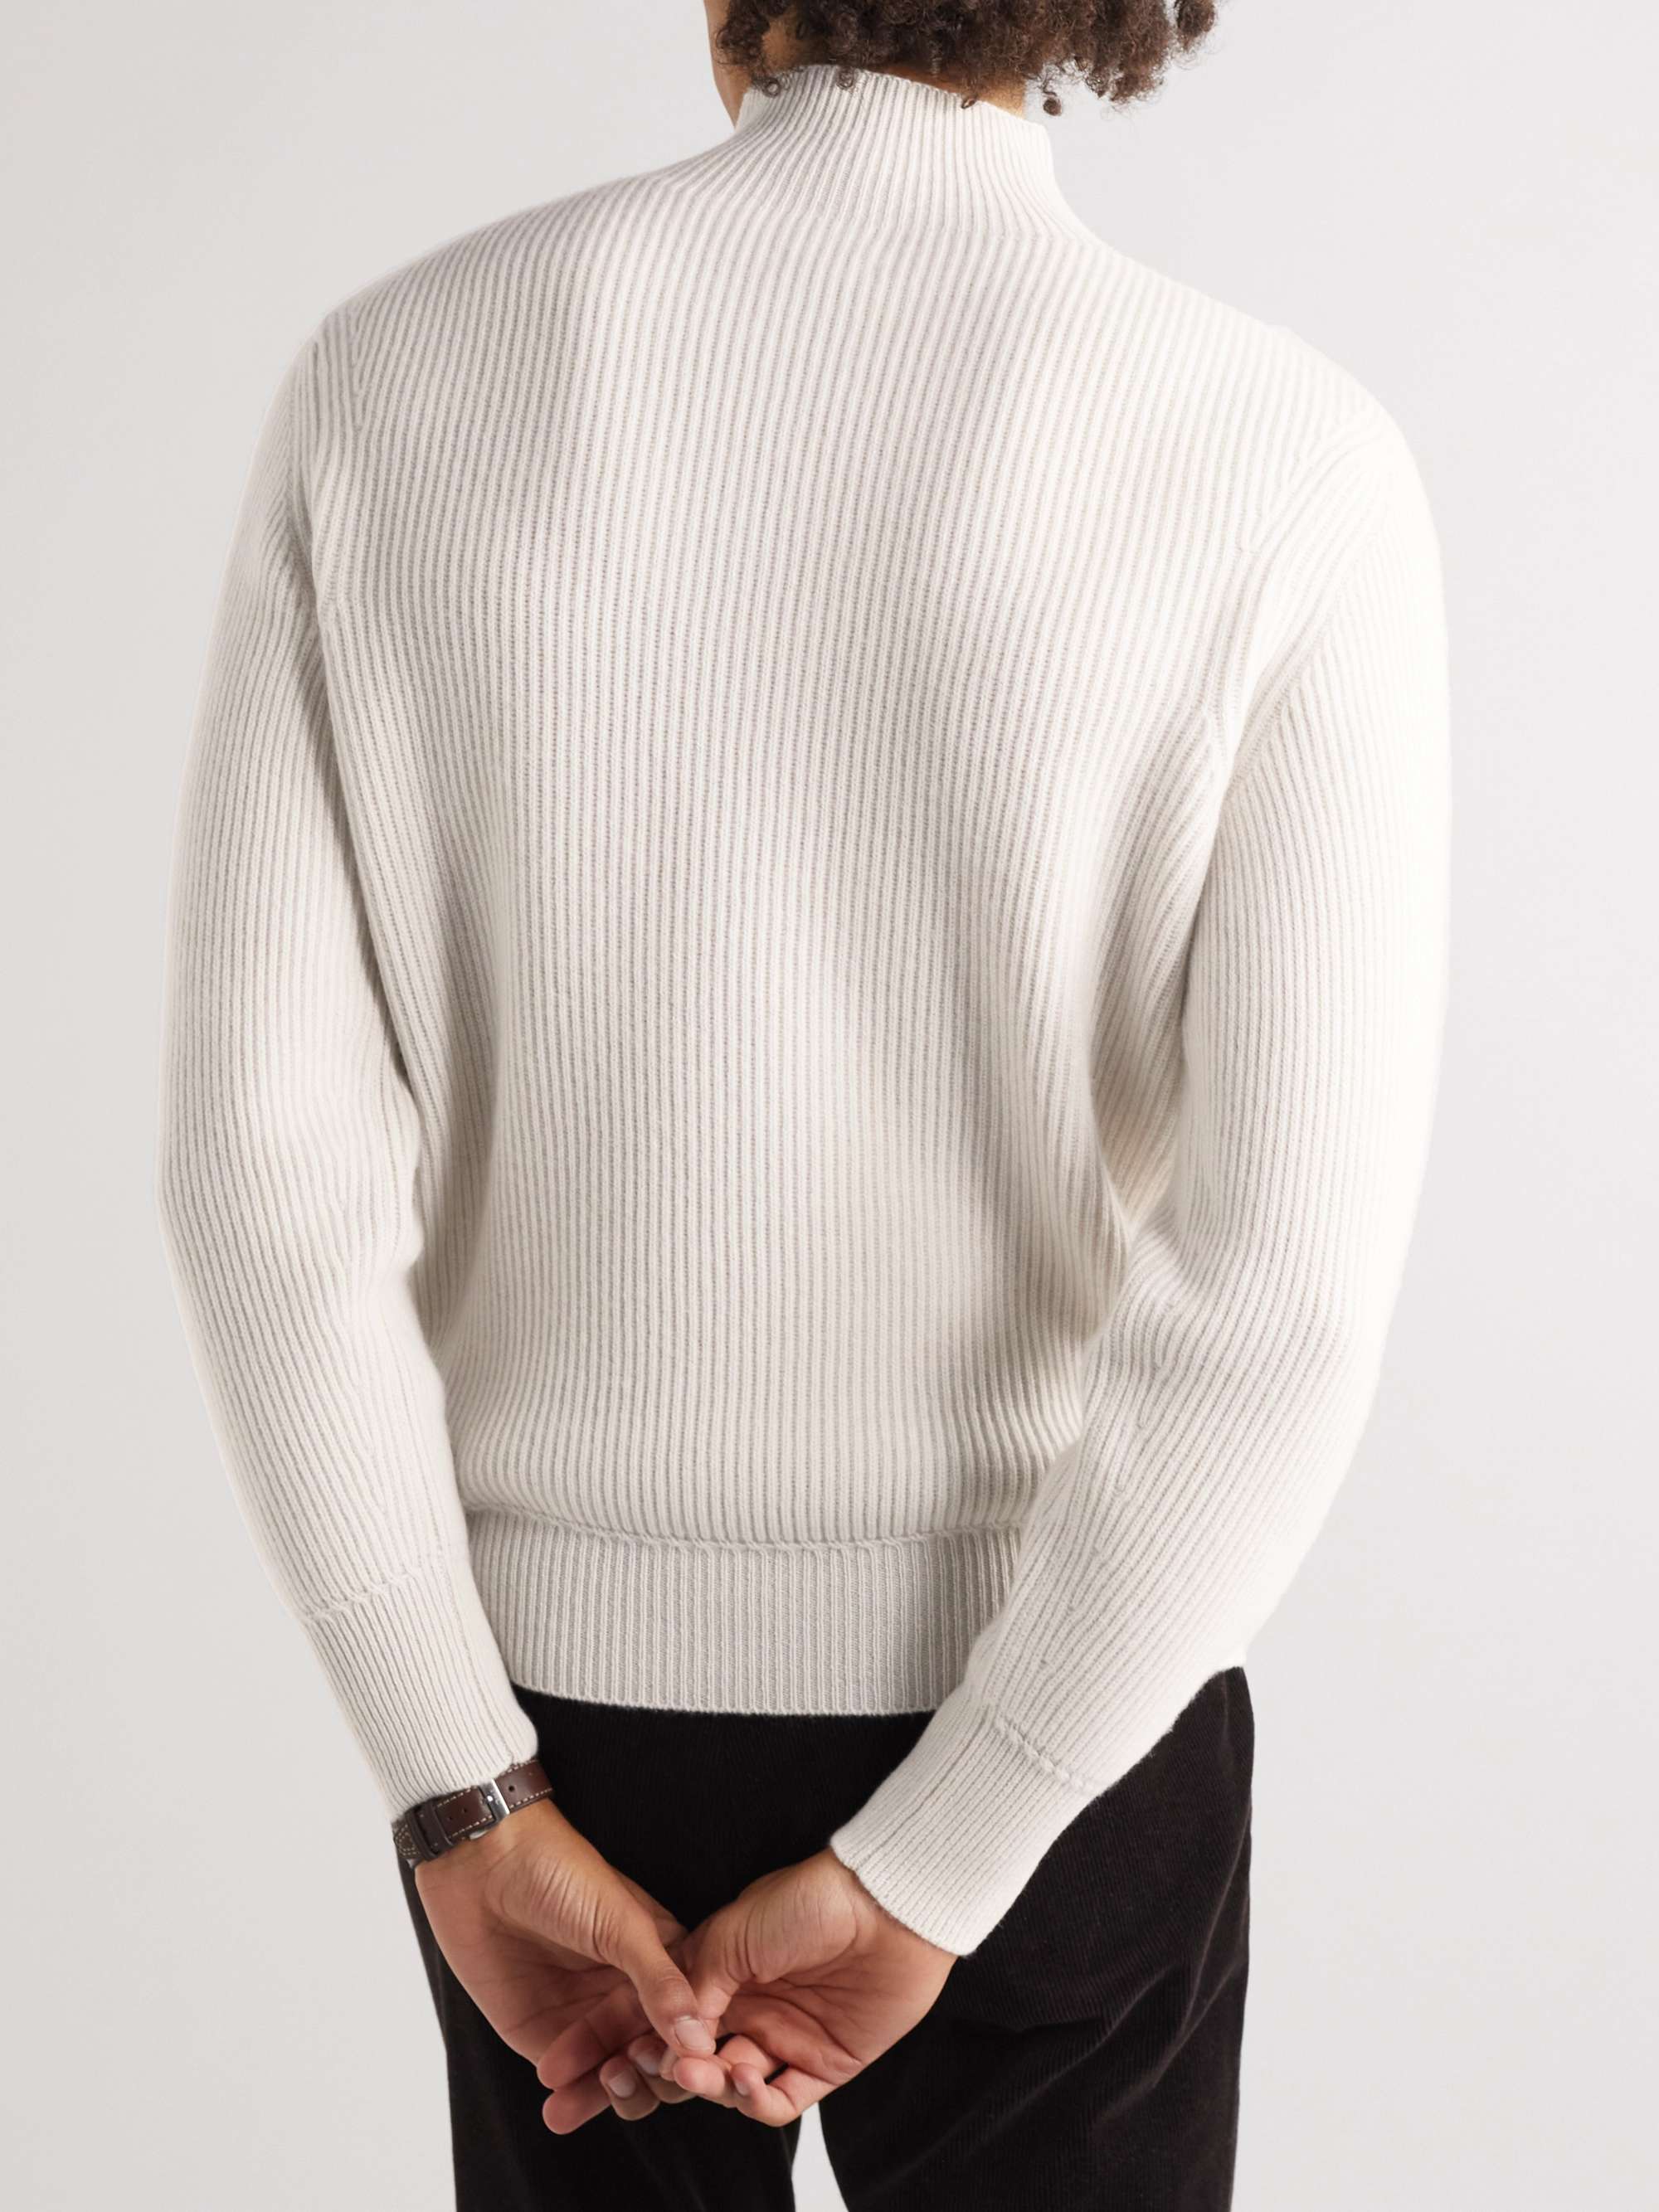 TOM FORD Ribbed Cashmere Rollneck Sweater